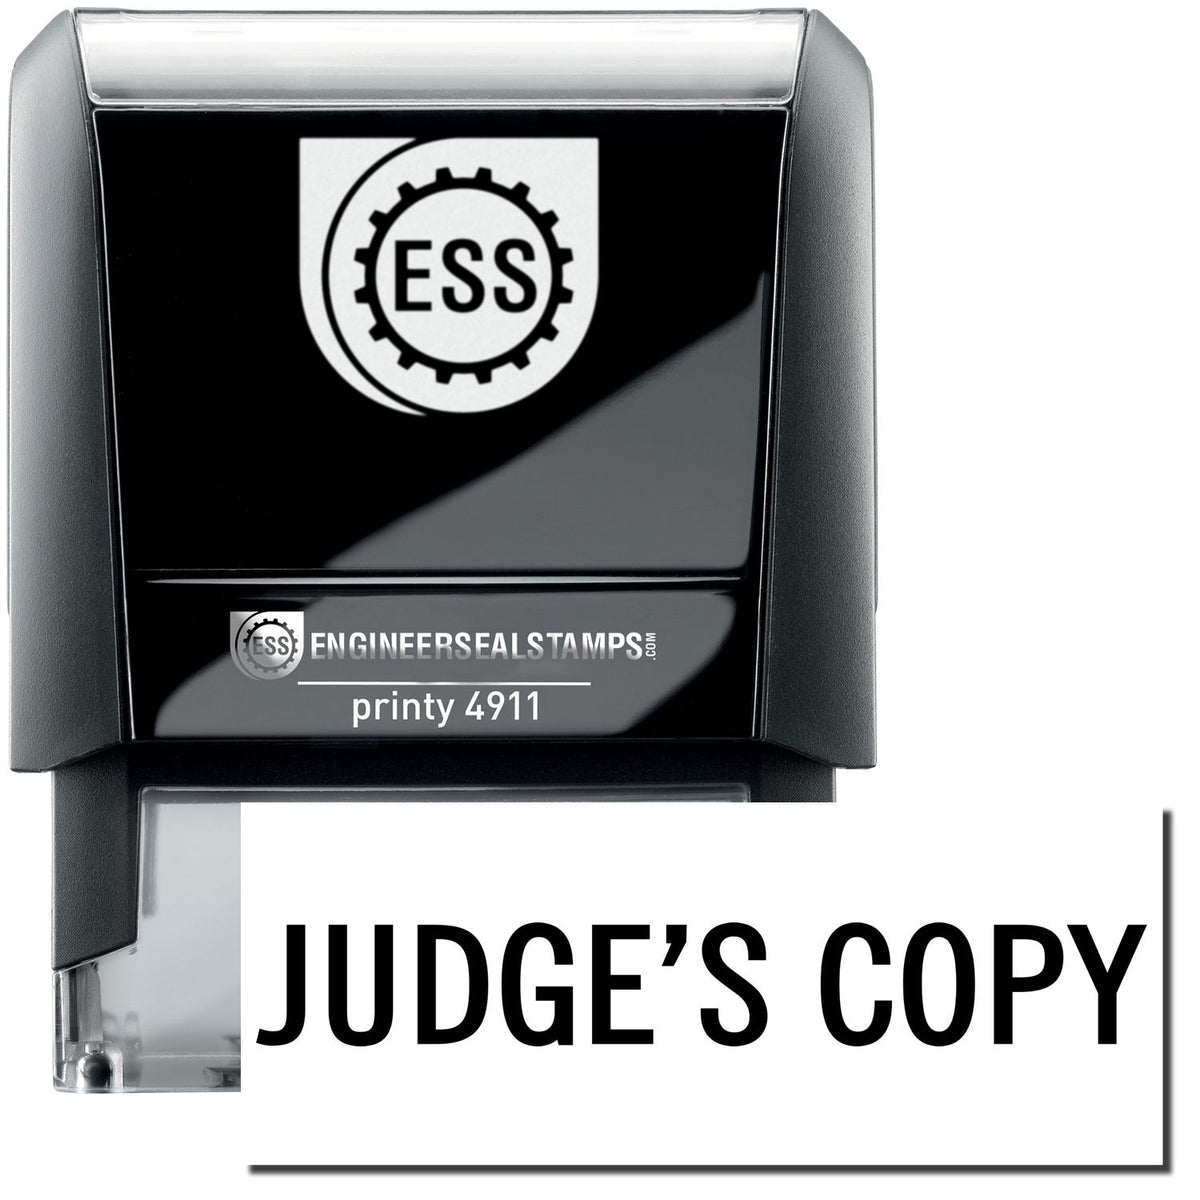 A self-inking stamp with a stamped image showing how the text &quot;JUDGE&#39;S COPY&quot; is displayed after stamping.